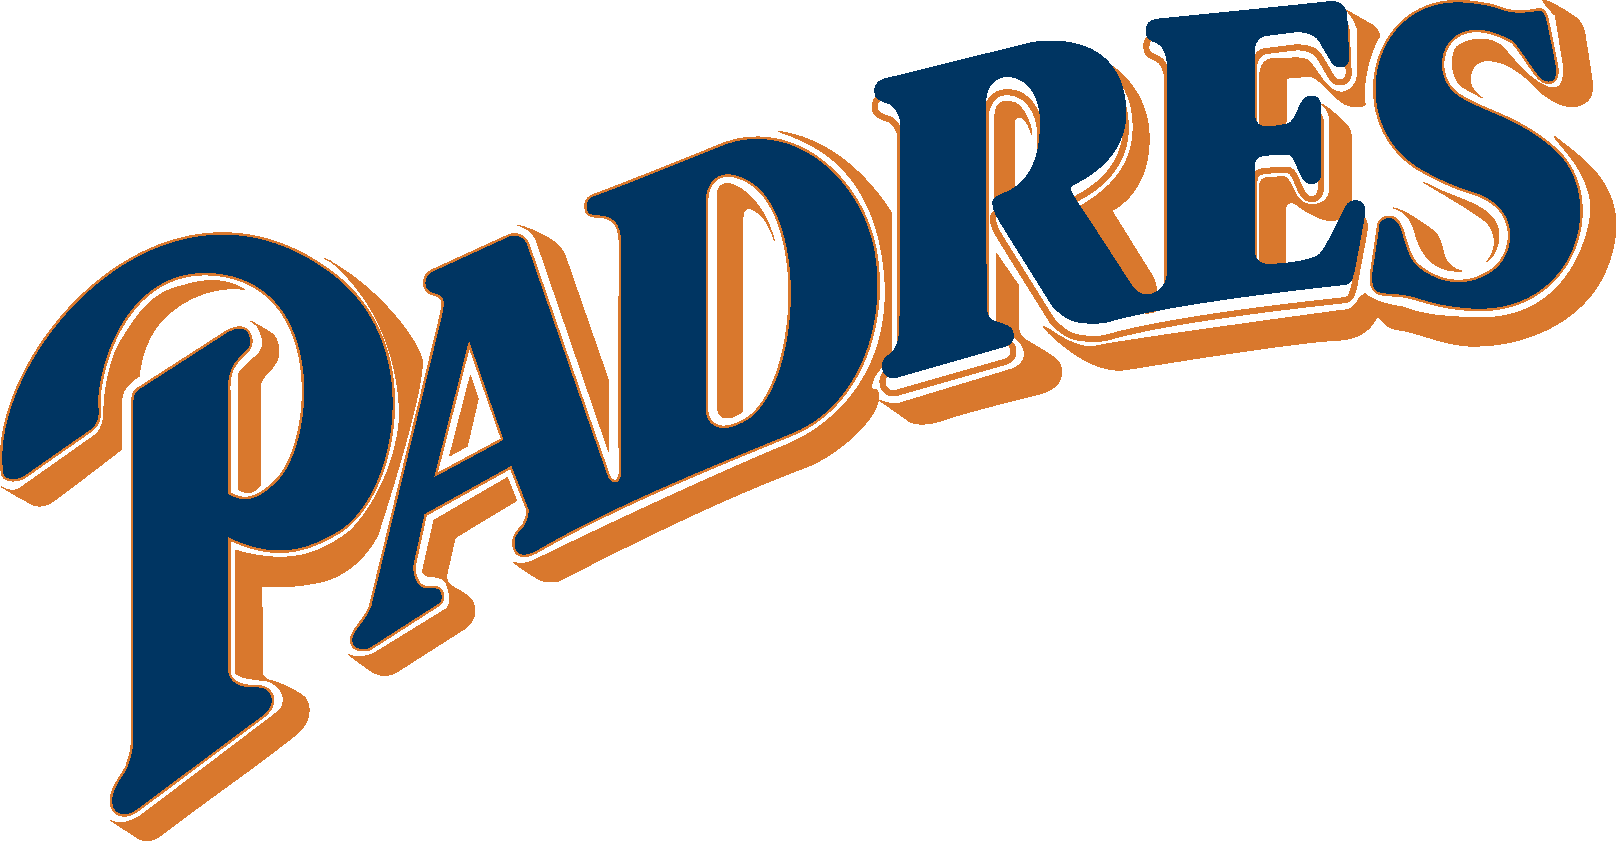 Paders Logo - San Diego Padres Logo Vector Icon Template Clipart Free Download